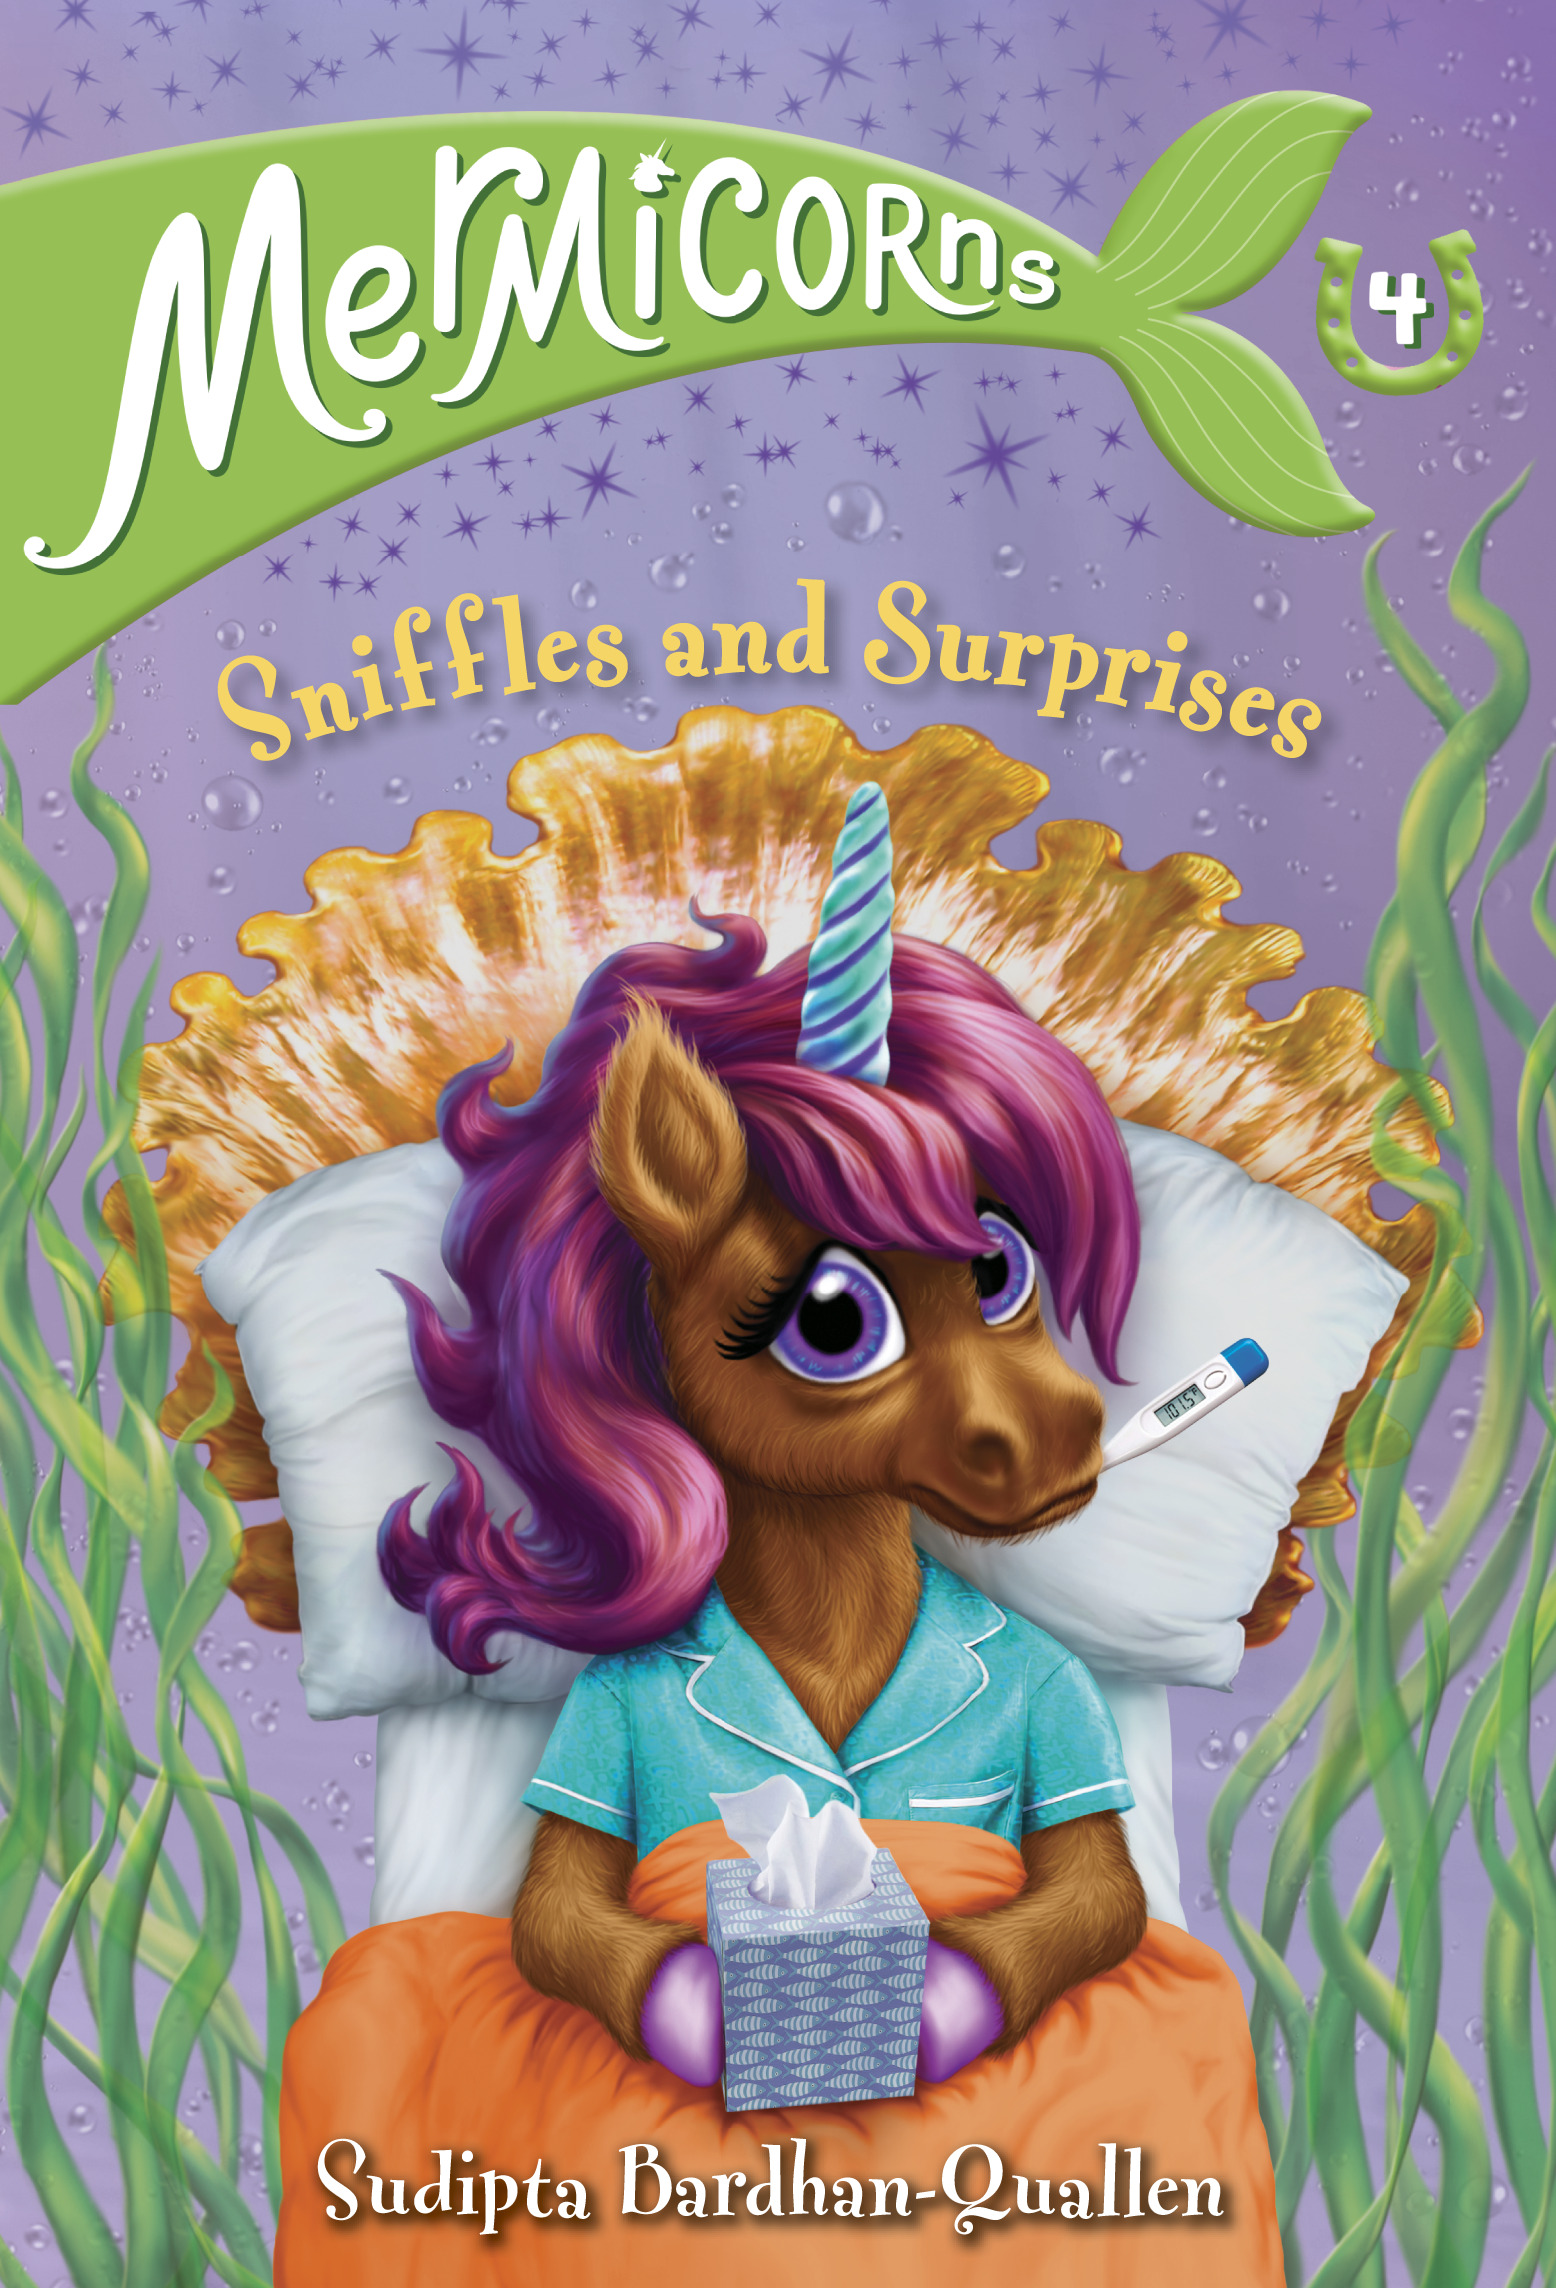 Mermicorns T.04: Sniffles and Surprises | 6-8 years old